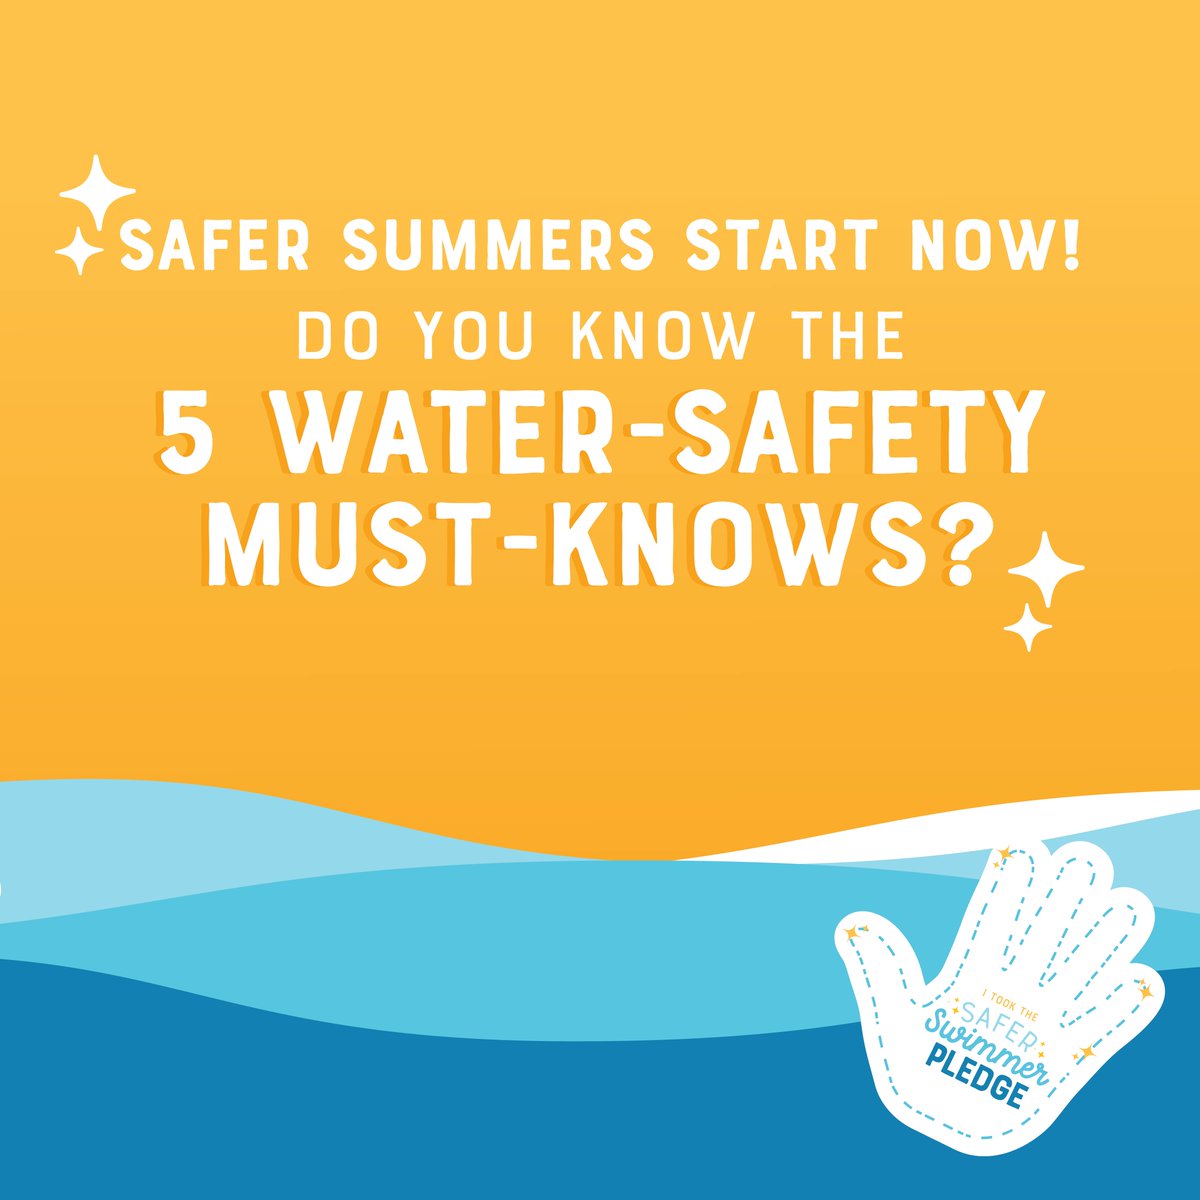 Do you know the 5 #watersafety must-knows? 🤔 When you take the #SaferSwimmerPledge with your kiddo you'll be reminded of these important rules to help you have a safer summer 🏖️ 

Take the pledge! goldfishswimschool.com/saferswimmerpl…

#WaterSafetyMonth